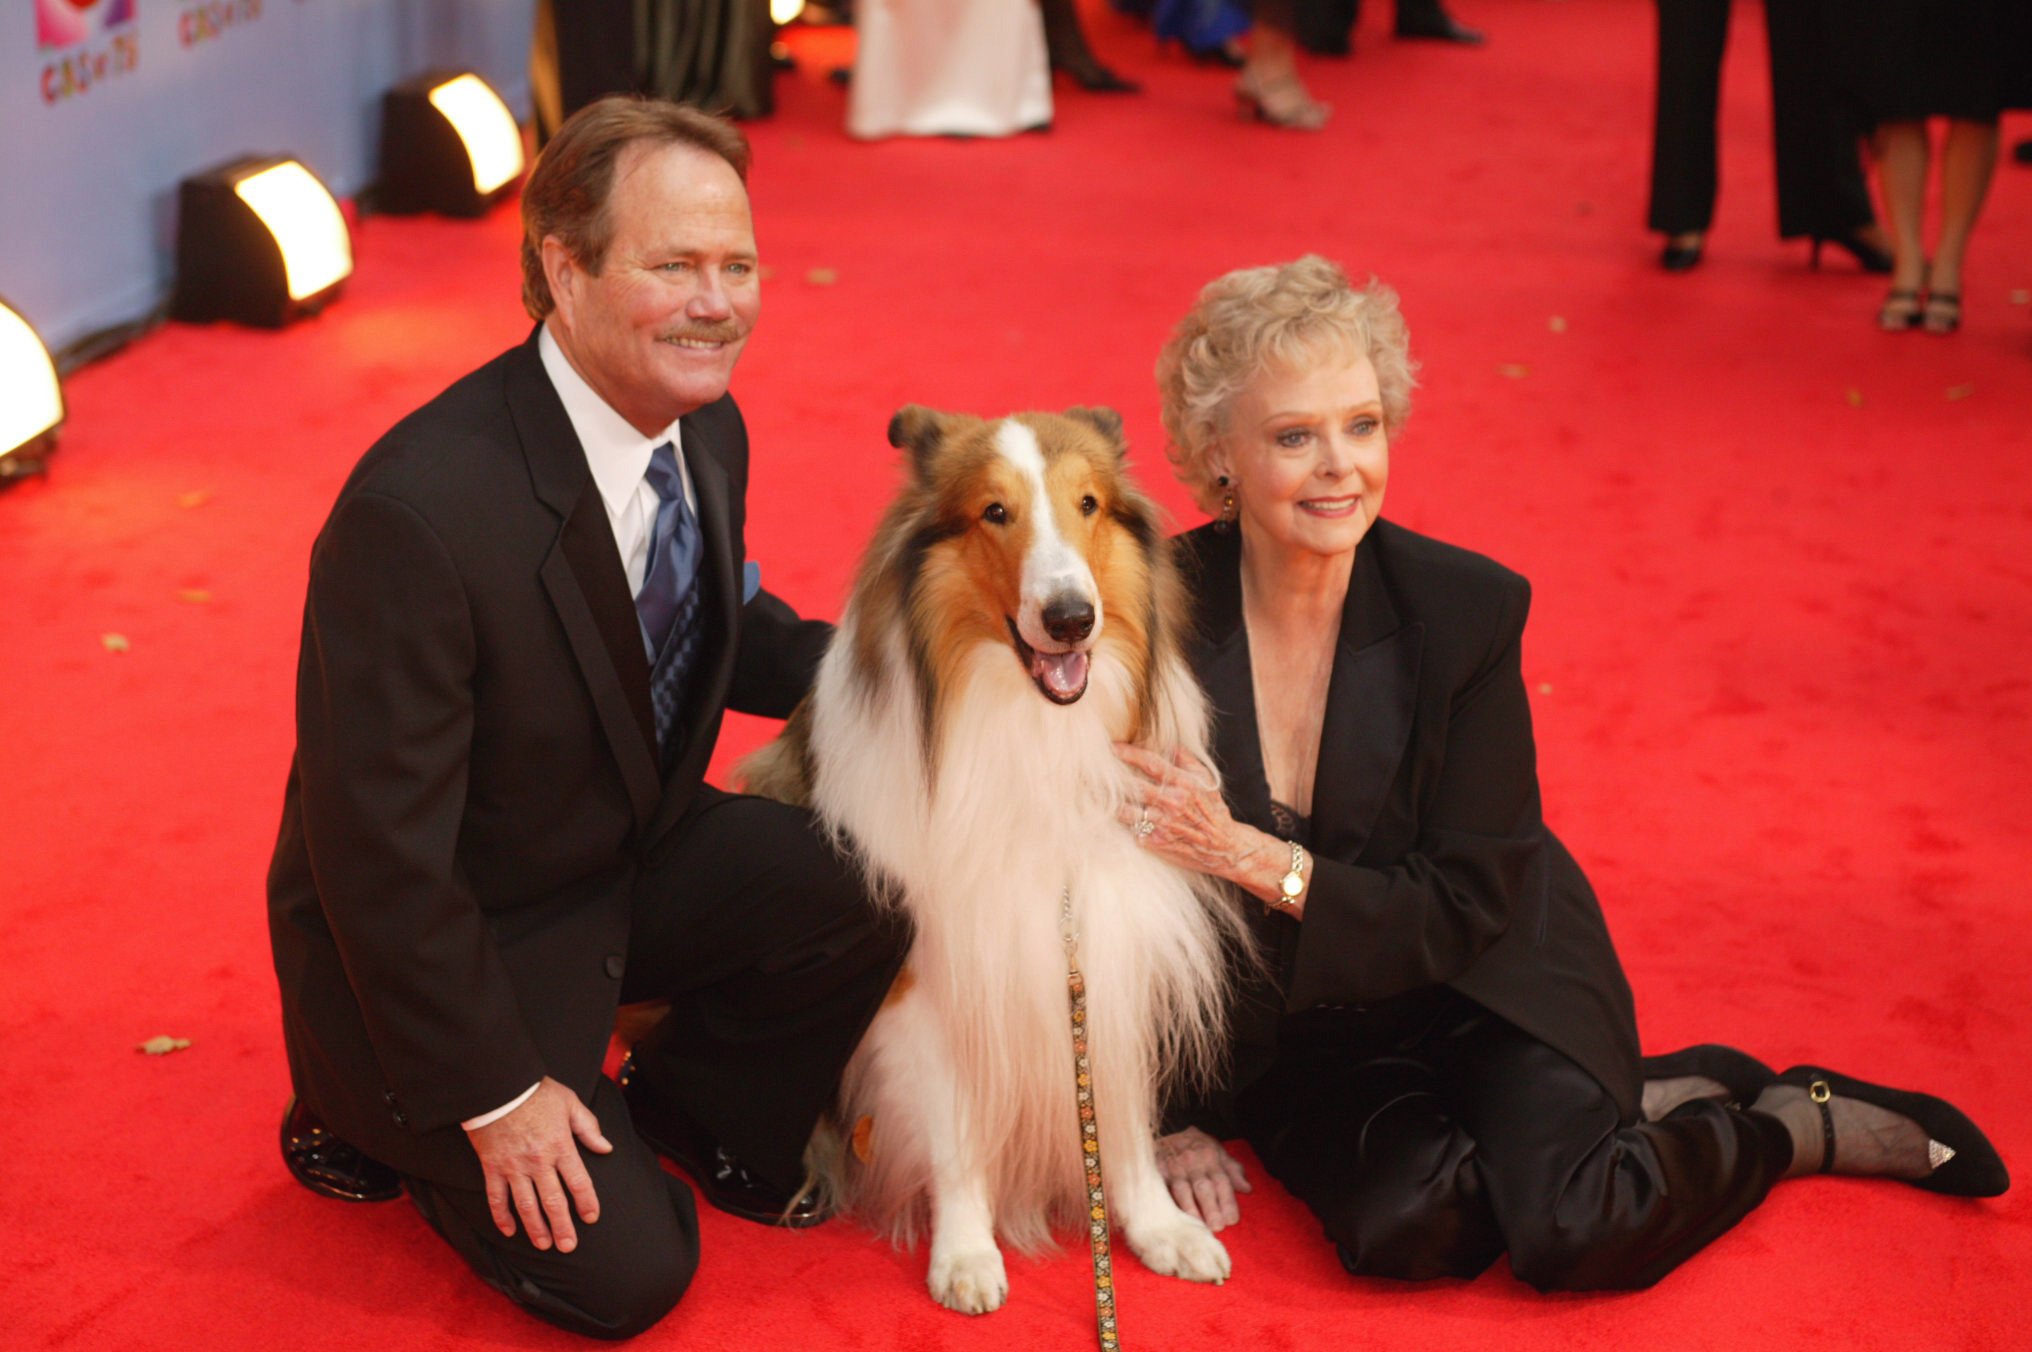 Jon Provost, Howard, best known as Lassie, and June Lockhart, in New York at the 75th anniversary of CBS television on November 2, 2003. | Source: Craig Blankenhorn/CBS Photo Archive/Getty Images